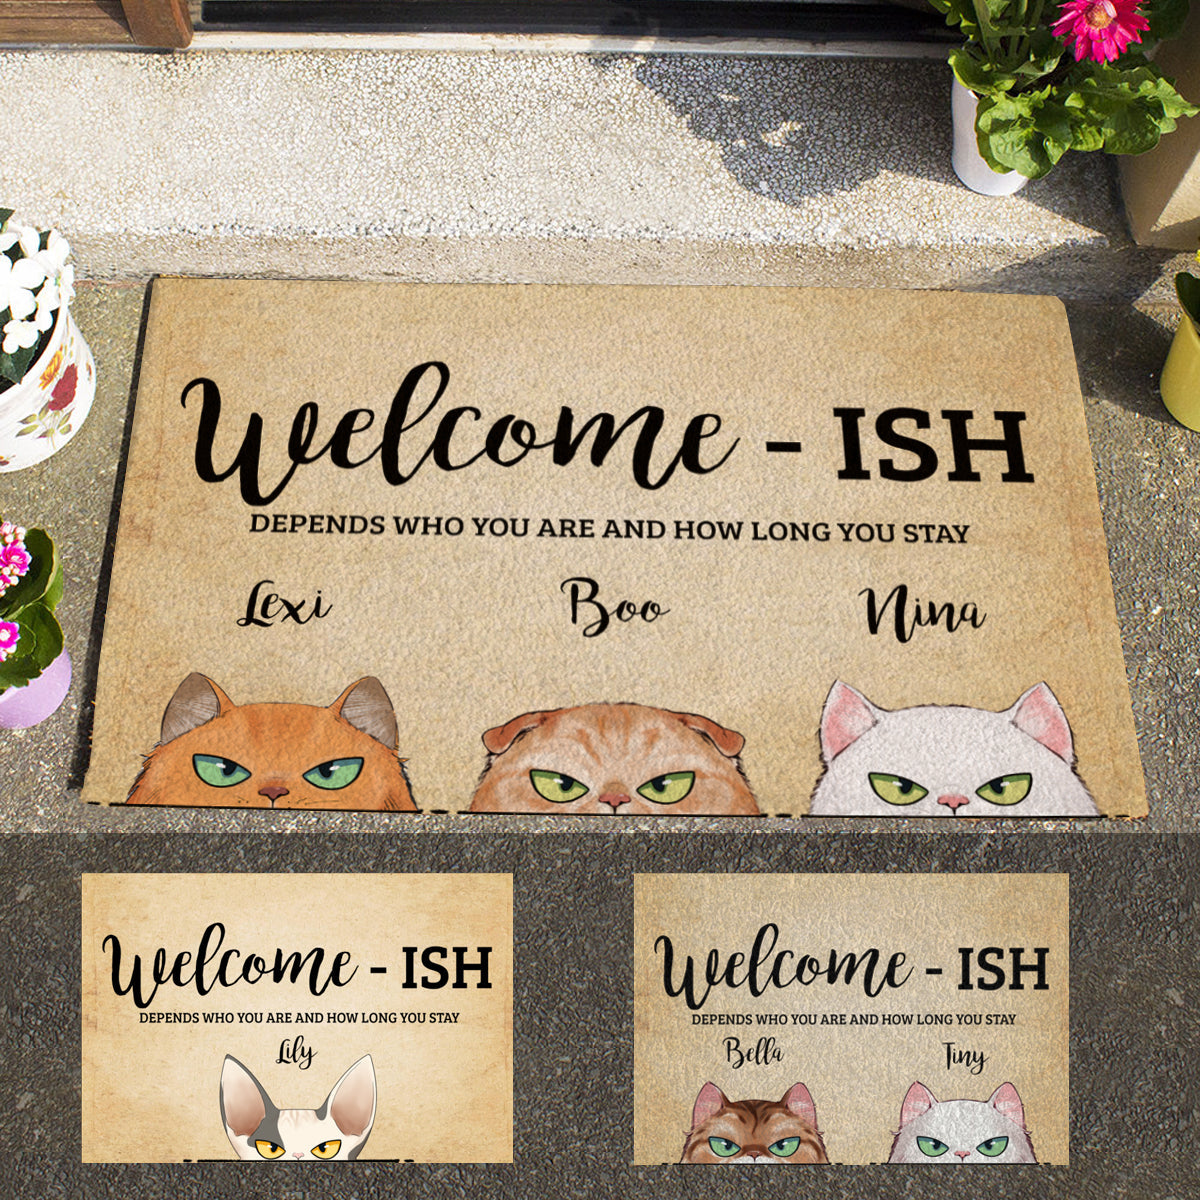  Irritated Cat, Welcome-ish Depends Who you are  Personalized Doormat Banner_doormat__Irritated_Cat_Welcome-ish_Depends_Who_you_are.jpg?v=1626666188